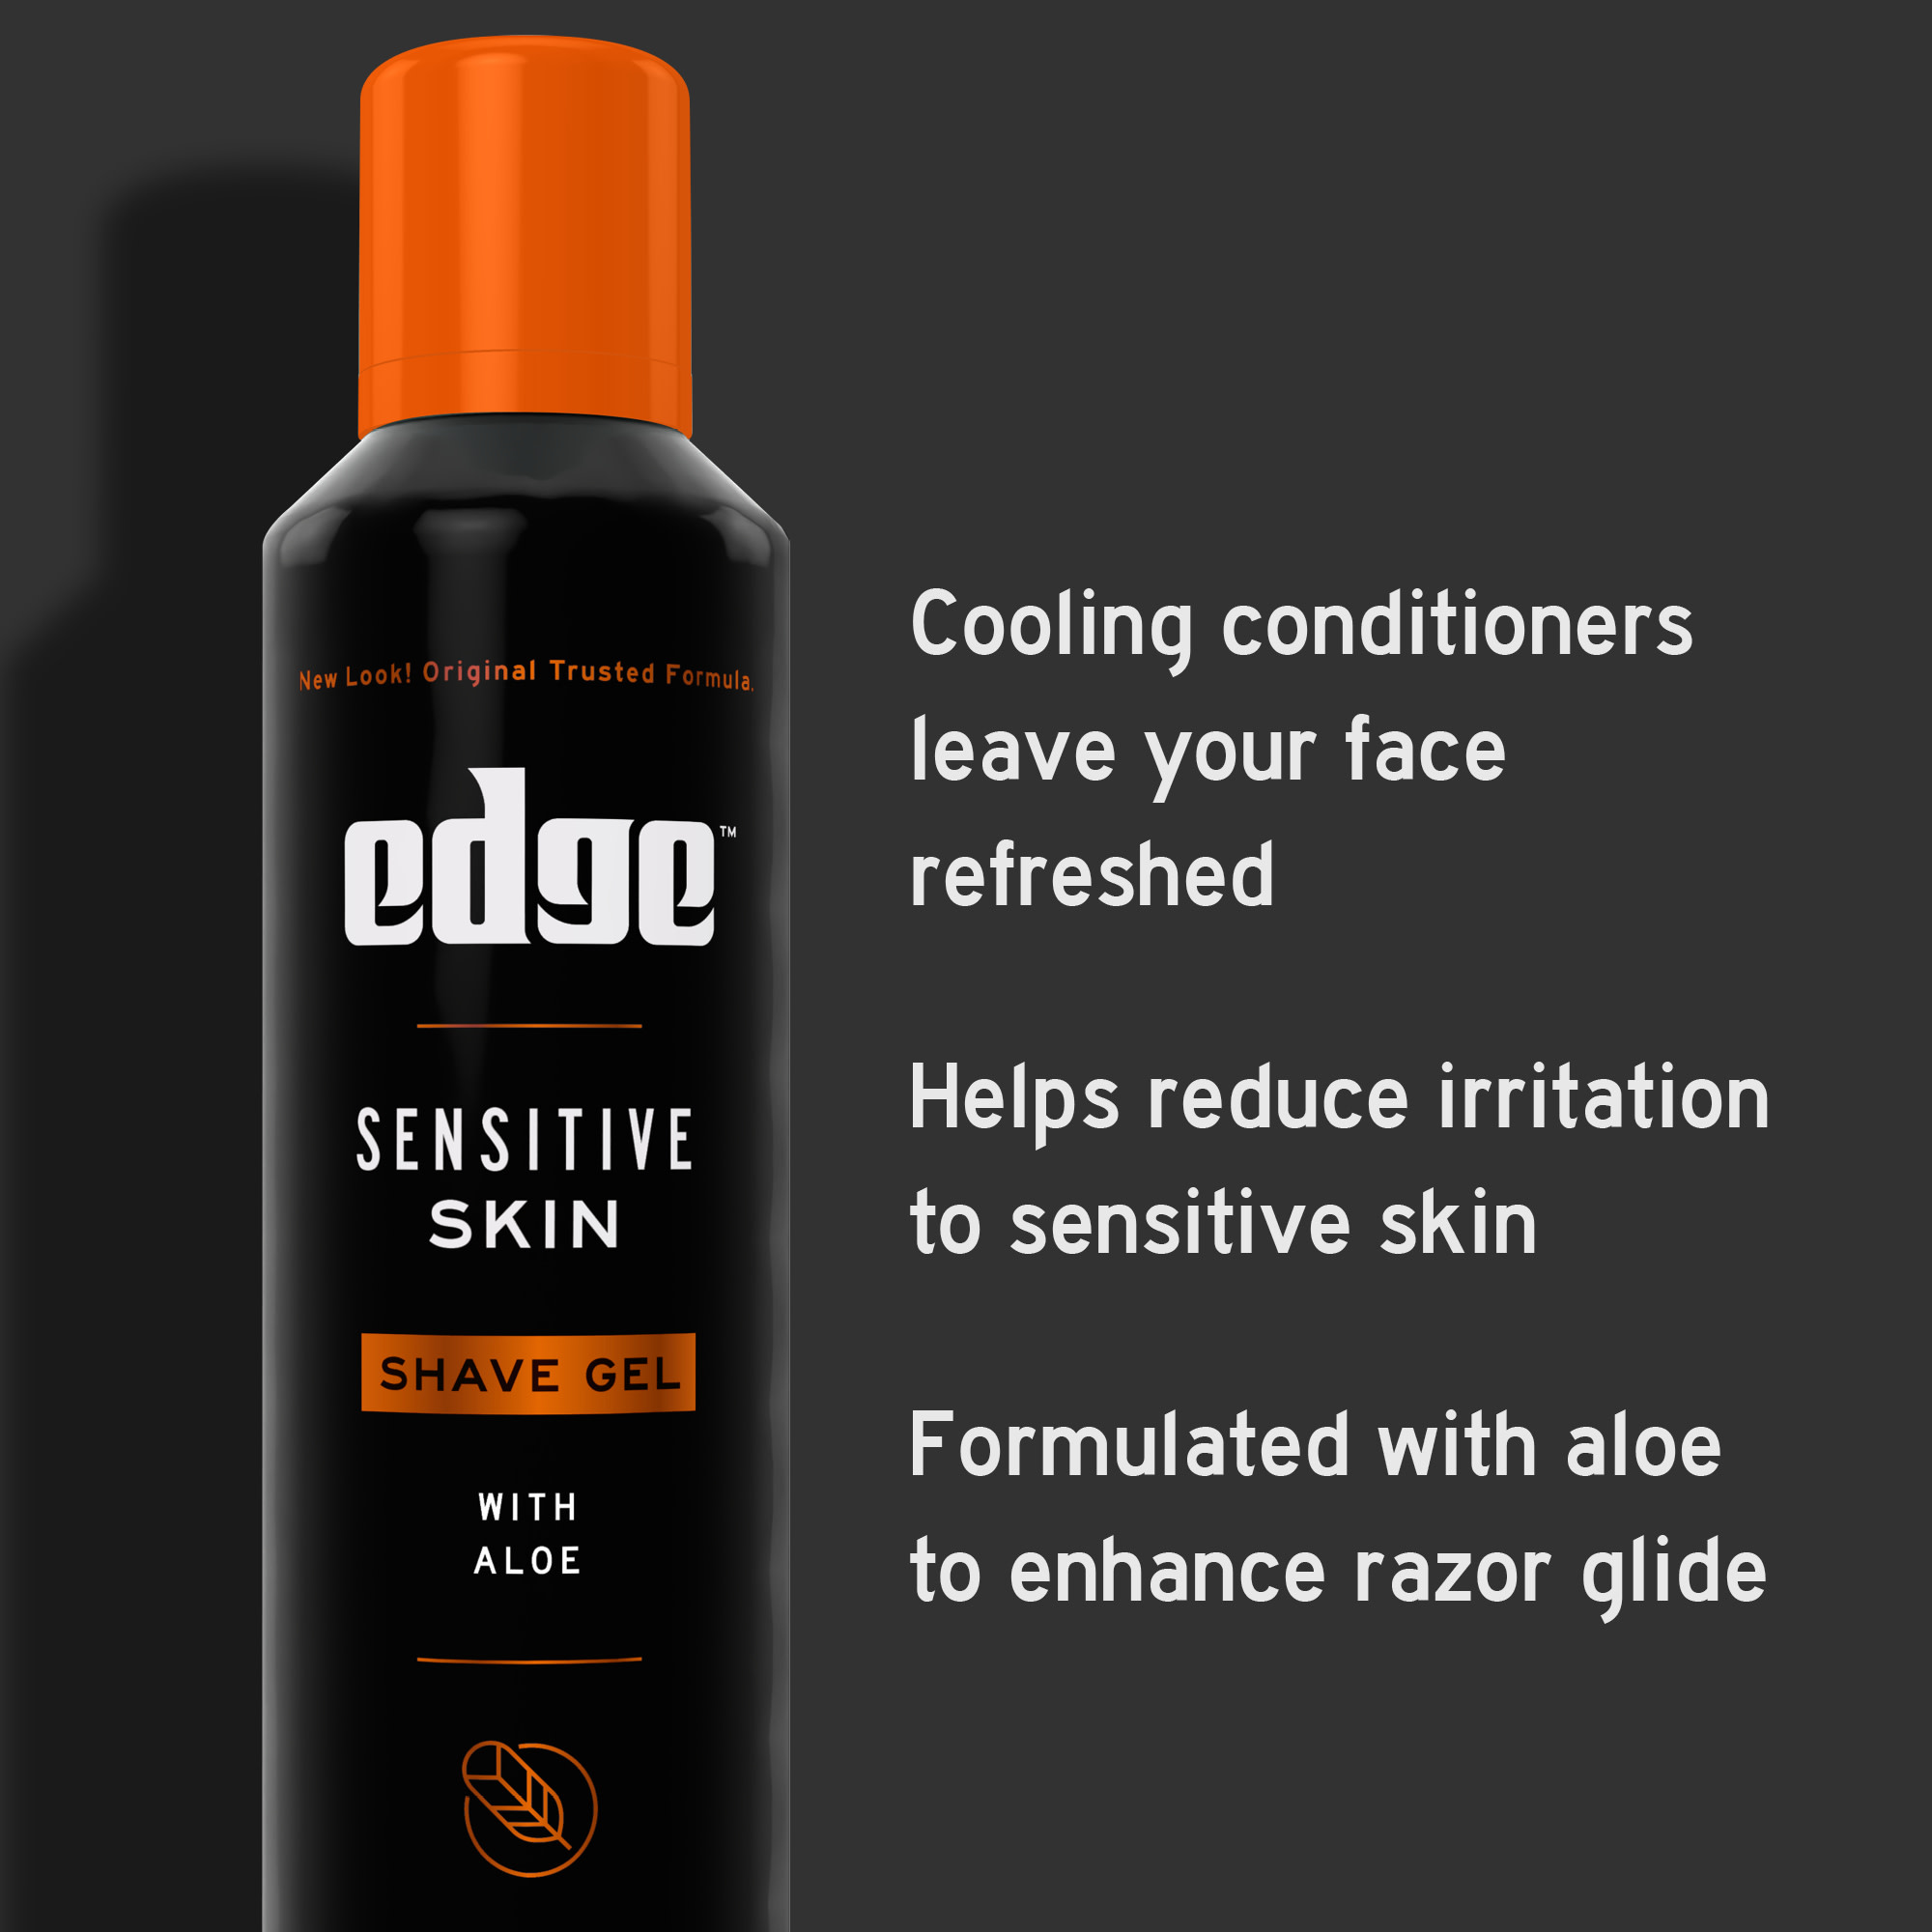 Edge Sensitive Skin Shave Gel for Men with Aloe, Twin Pack, 14 oz - image 4 of 10